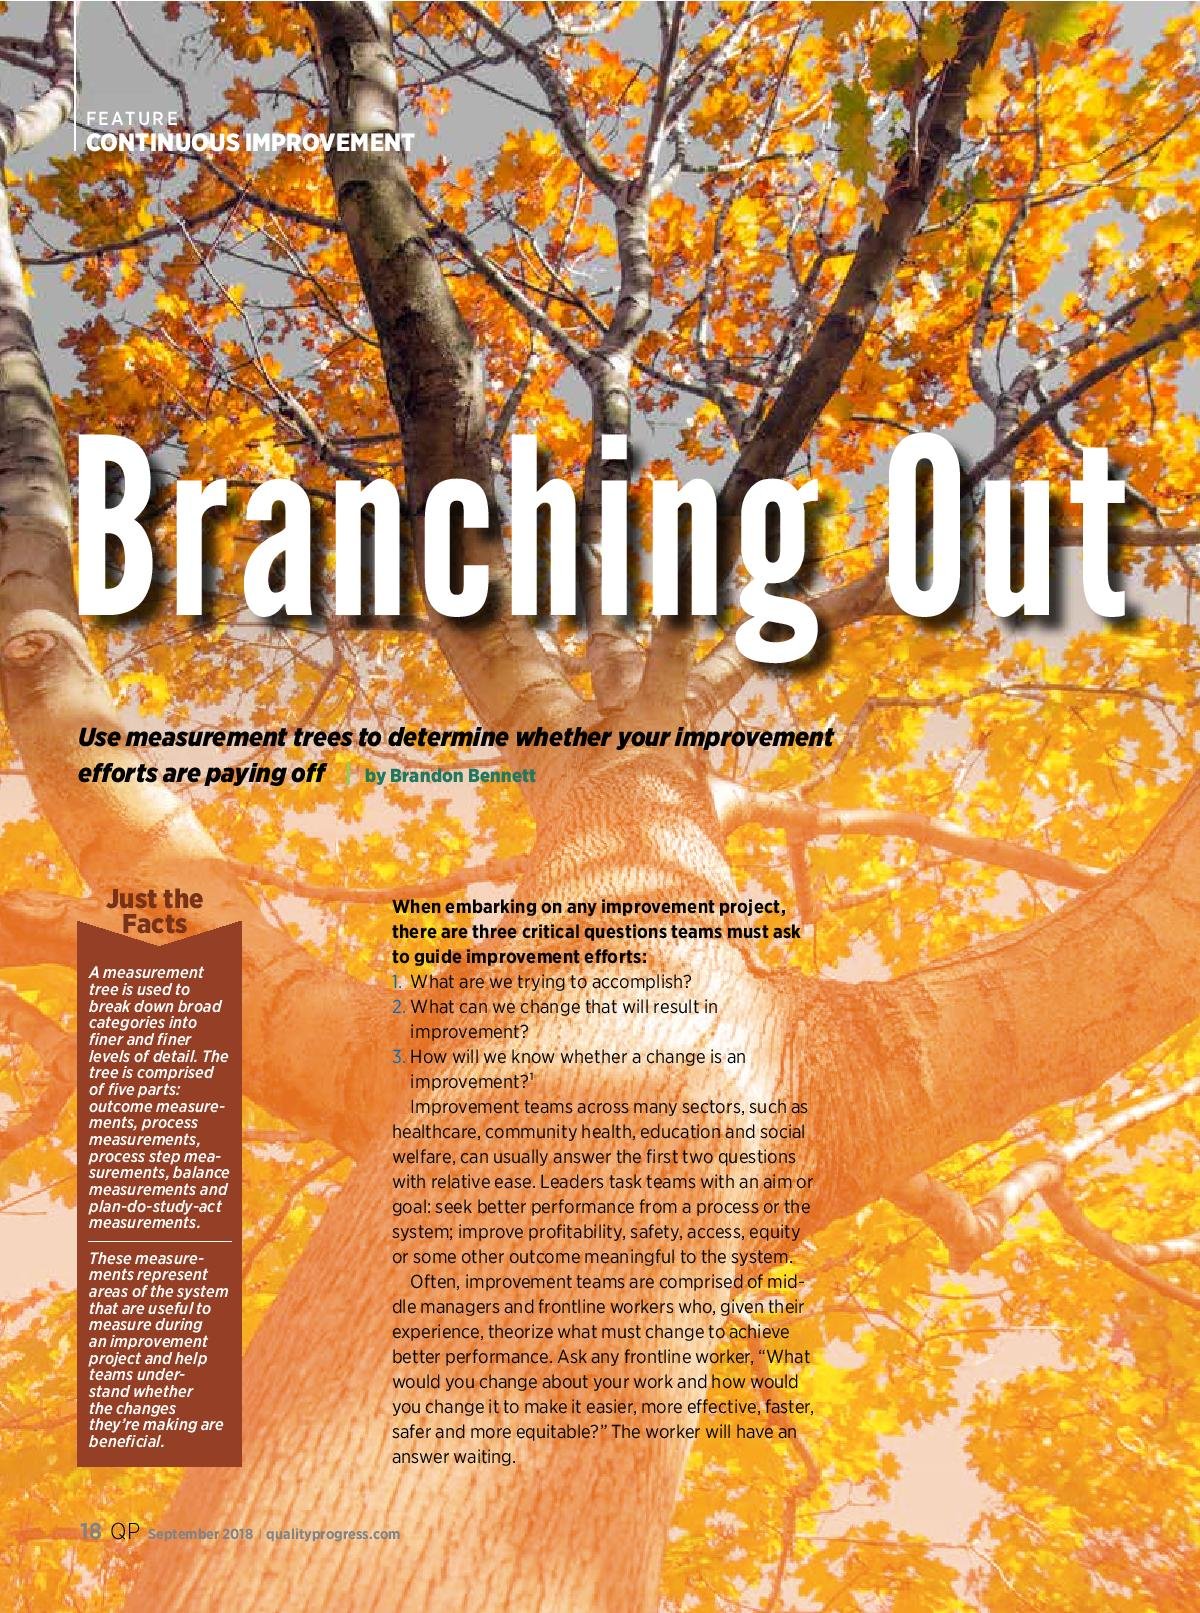 QP_Branching-Out_Measurement Tree_20180901-page-001.jpg